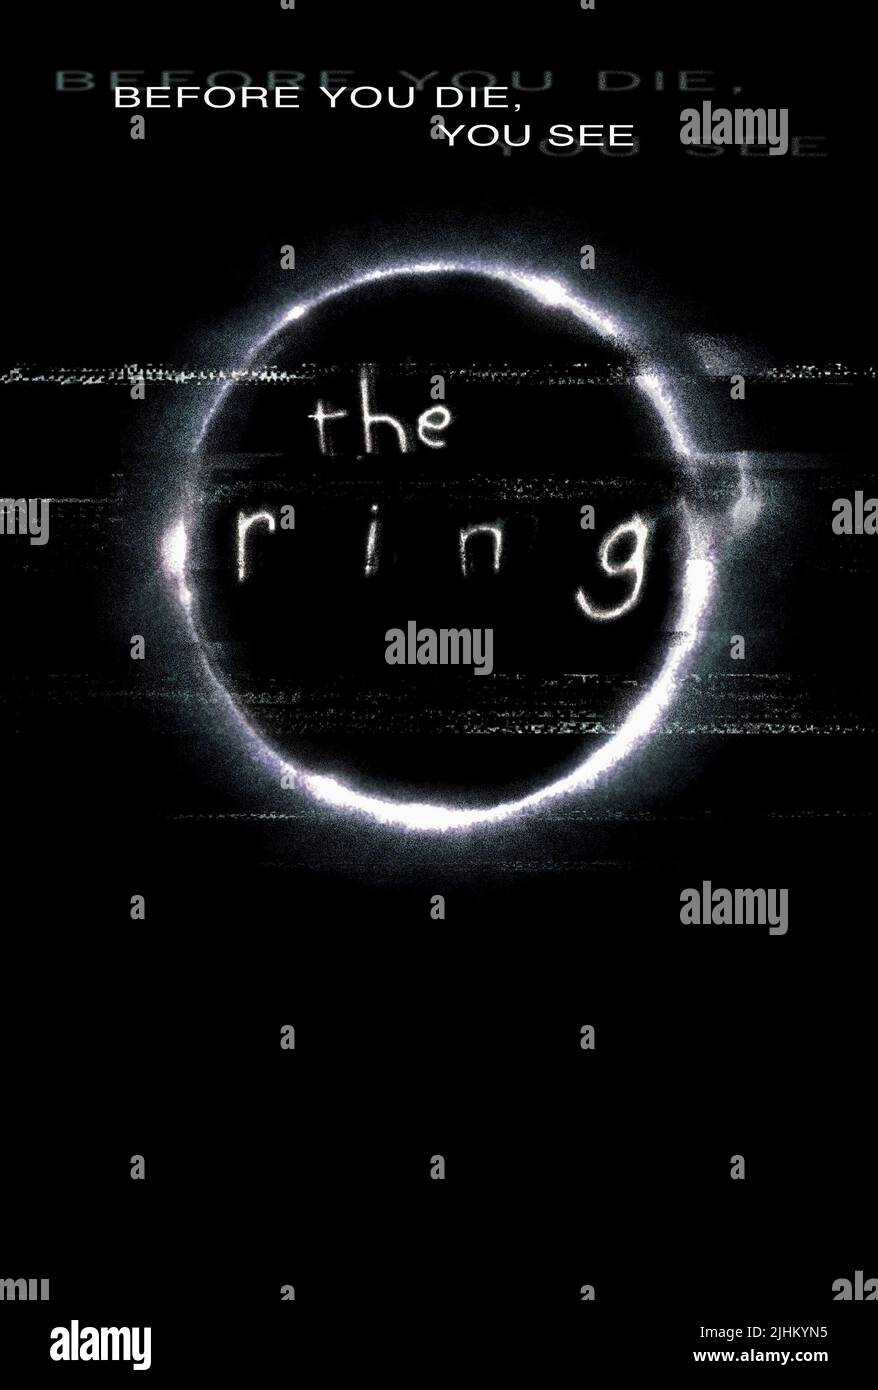 THE RING | Best of - YouTube